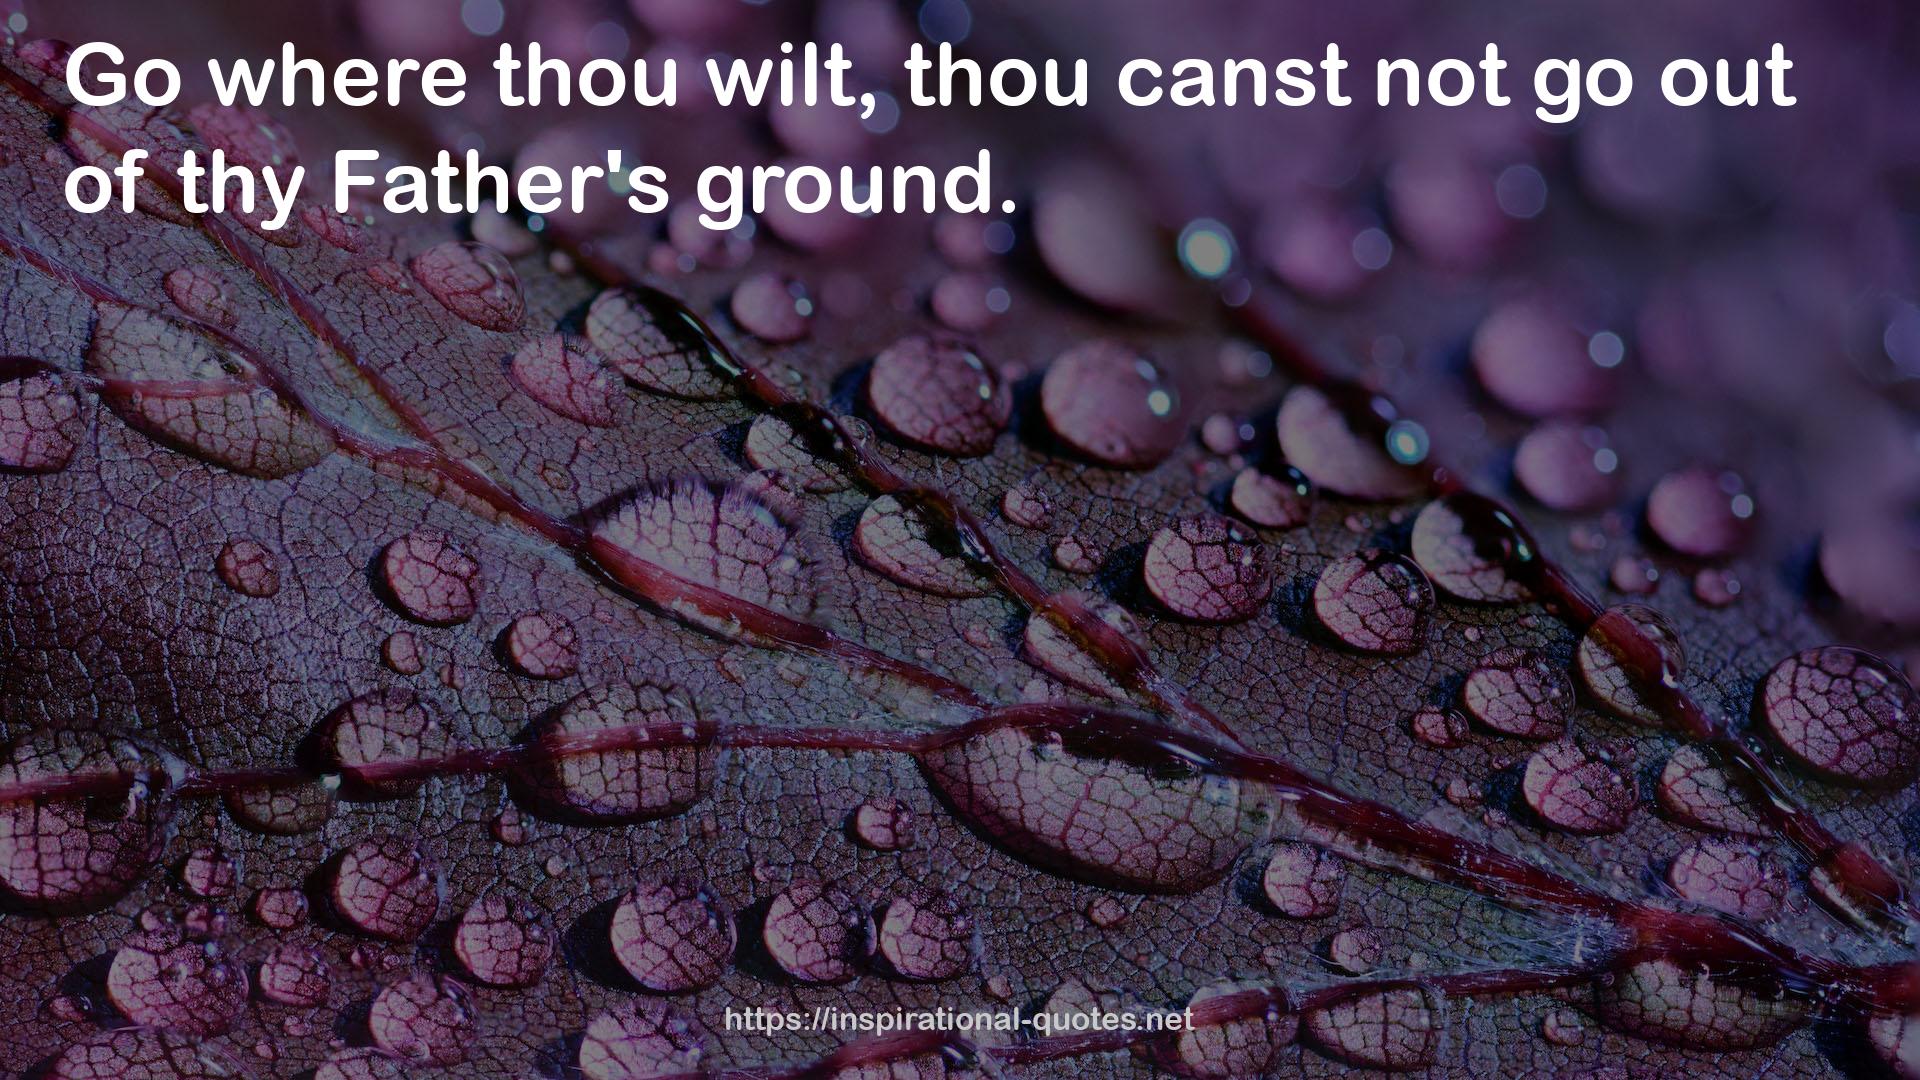 thou canst  QUOTES